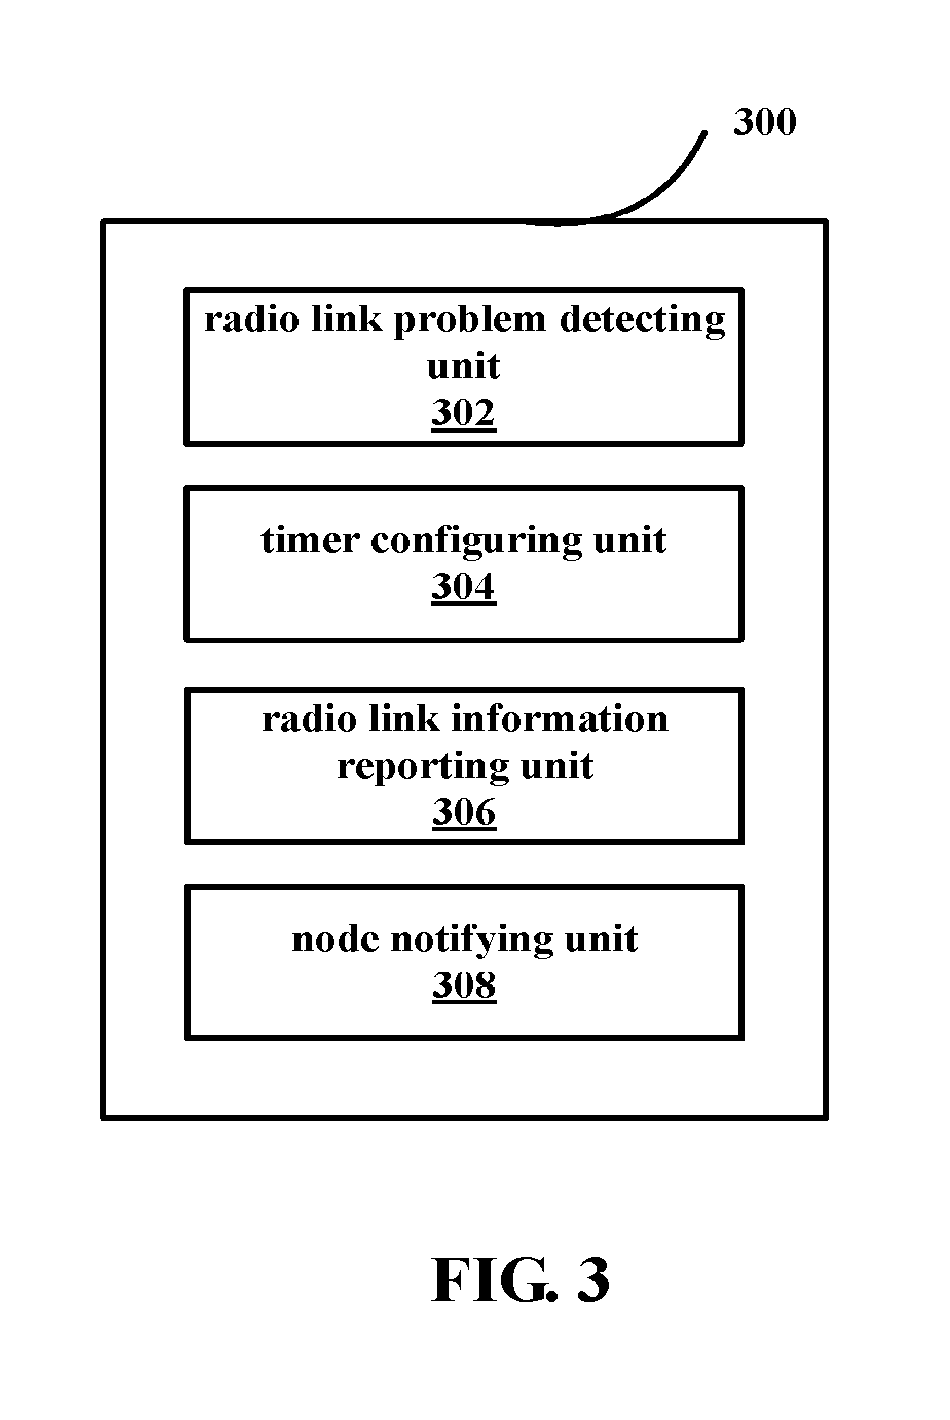 Wireless communication system for reporting radio link information of a first radio link via a second radio link when radio link problem has occurred in the first radio link